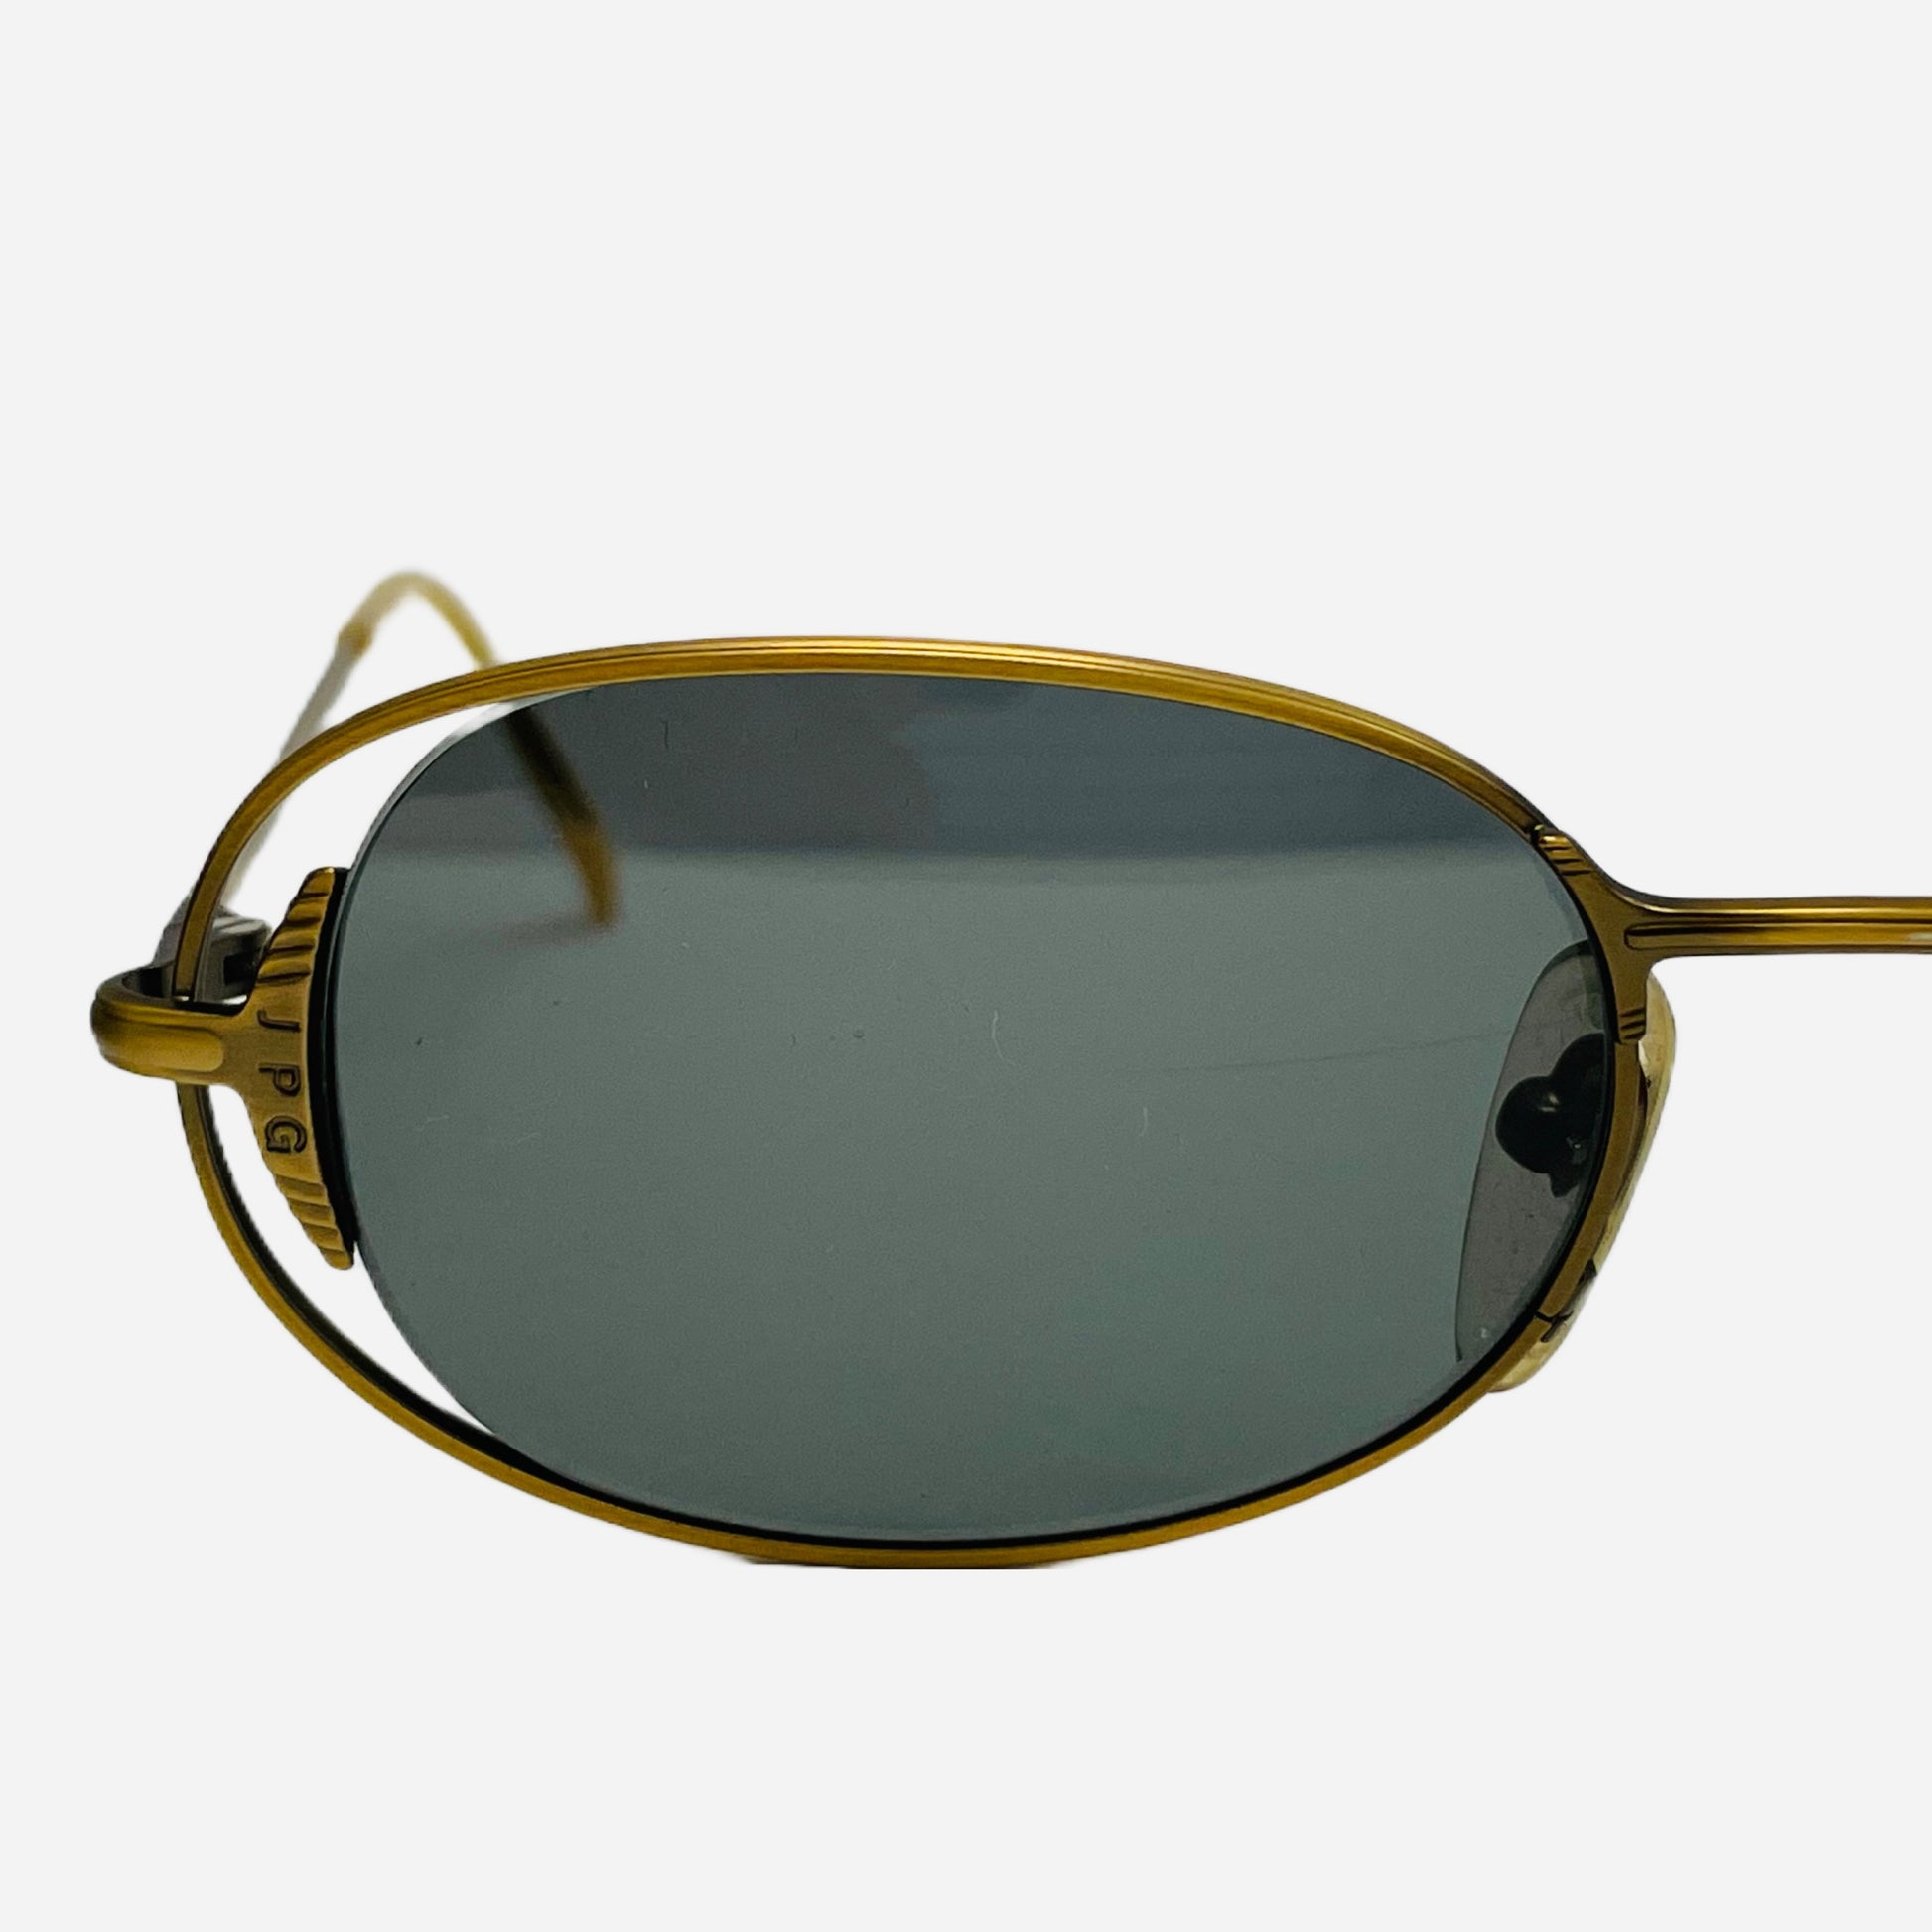 Vintage-Jean-Paul-Gaultier-Sonnenbrille-Sunglasses-Model56-3172-made-in-japan-the-seekers-detail-left-shade